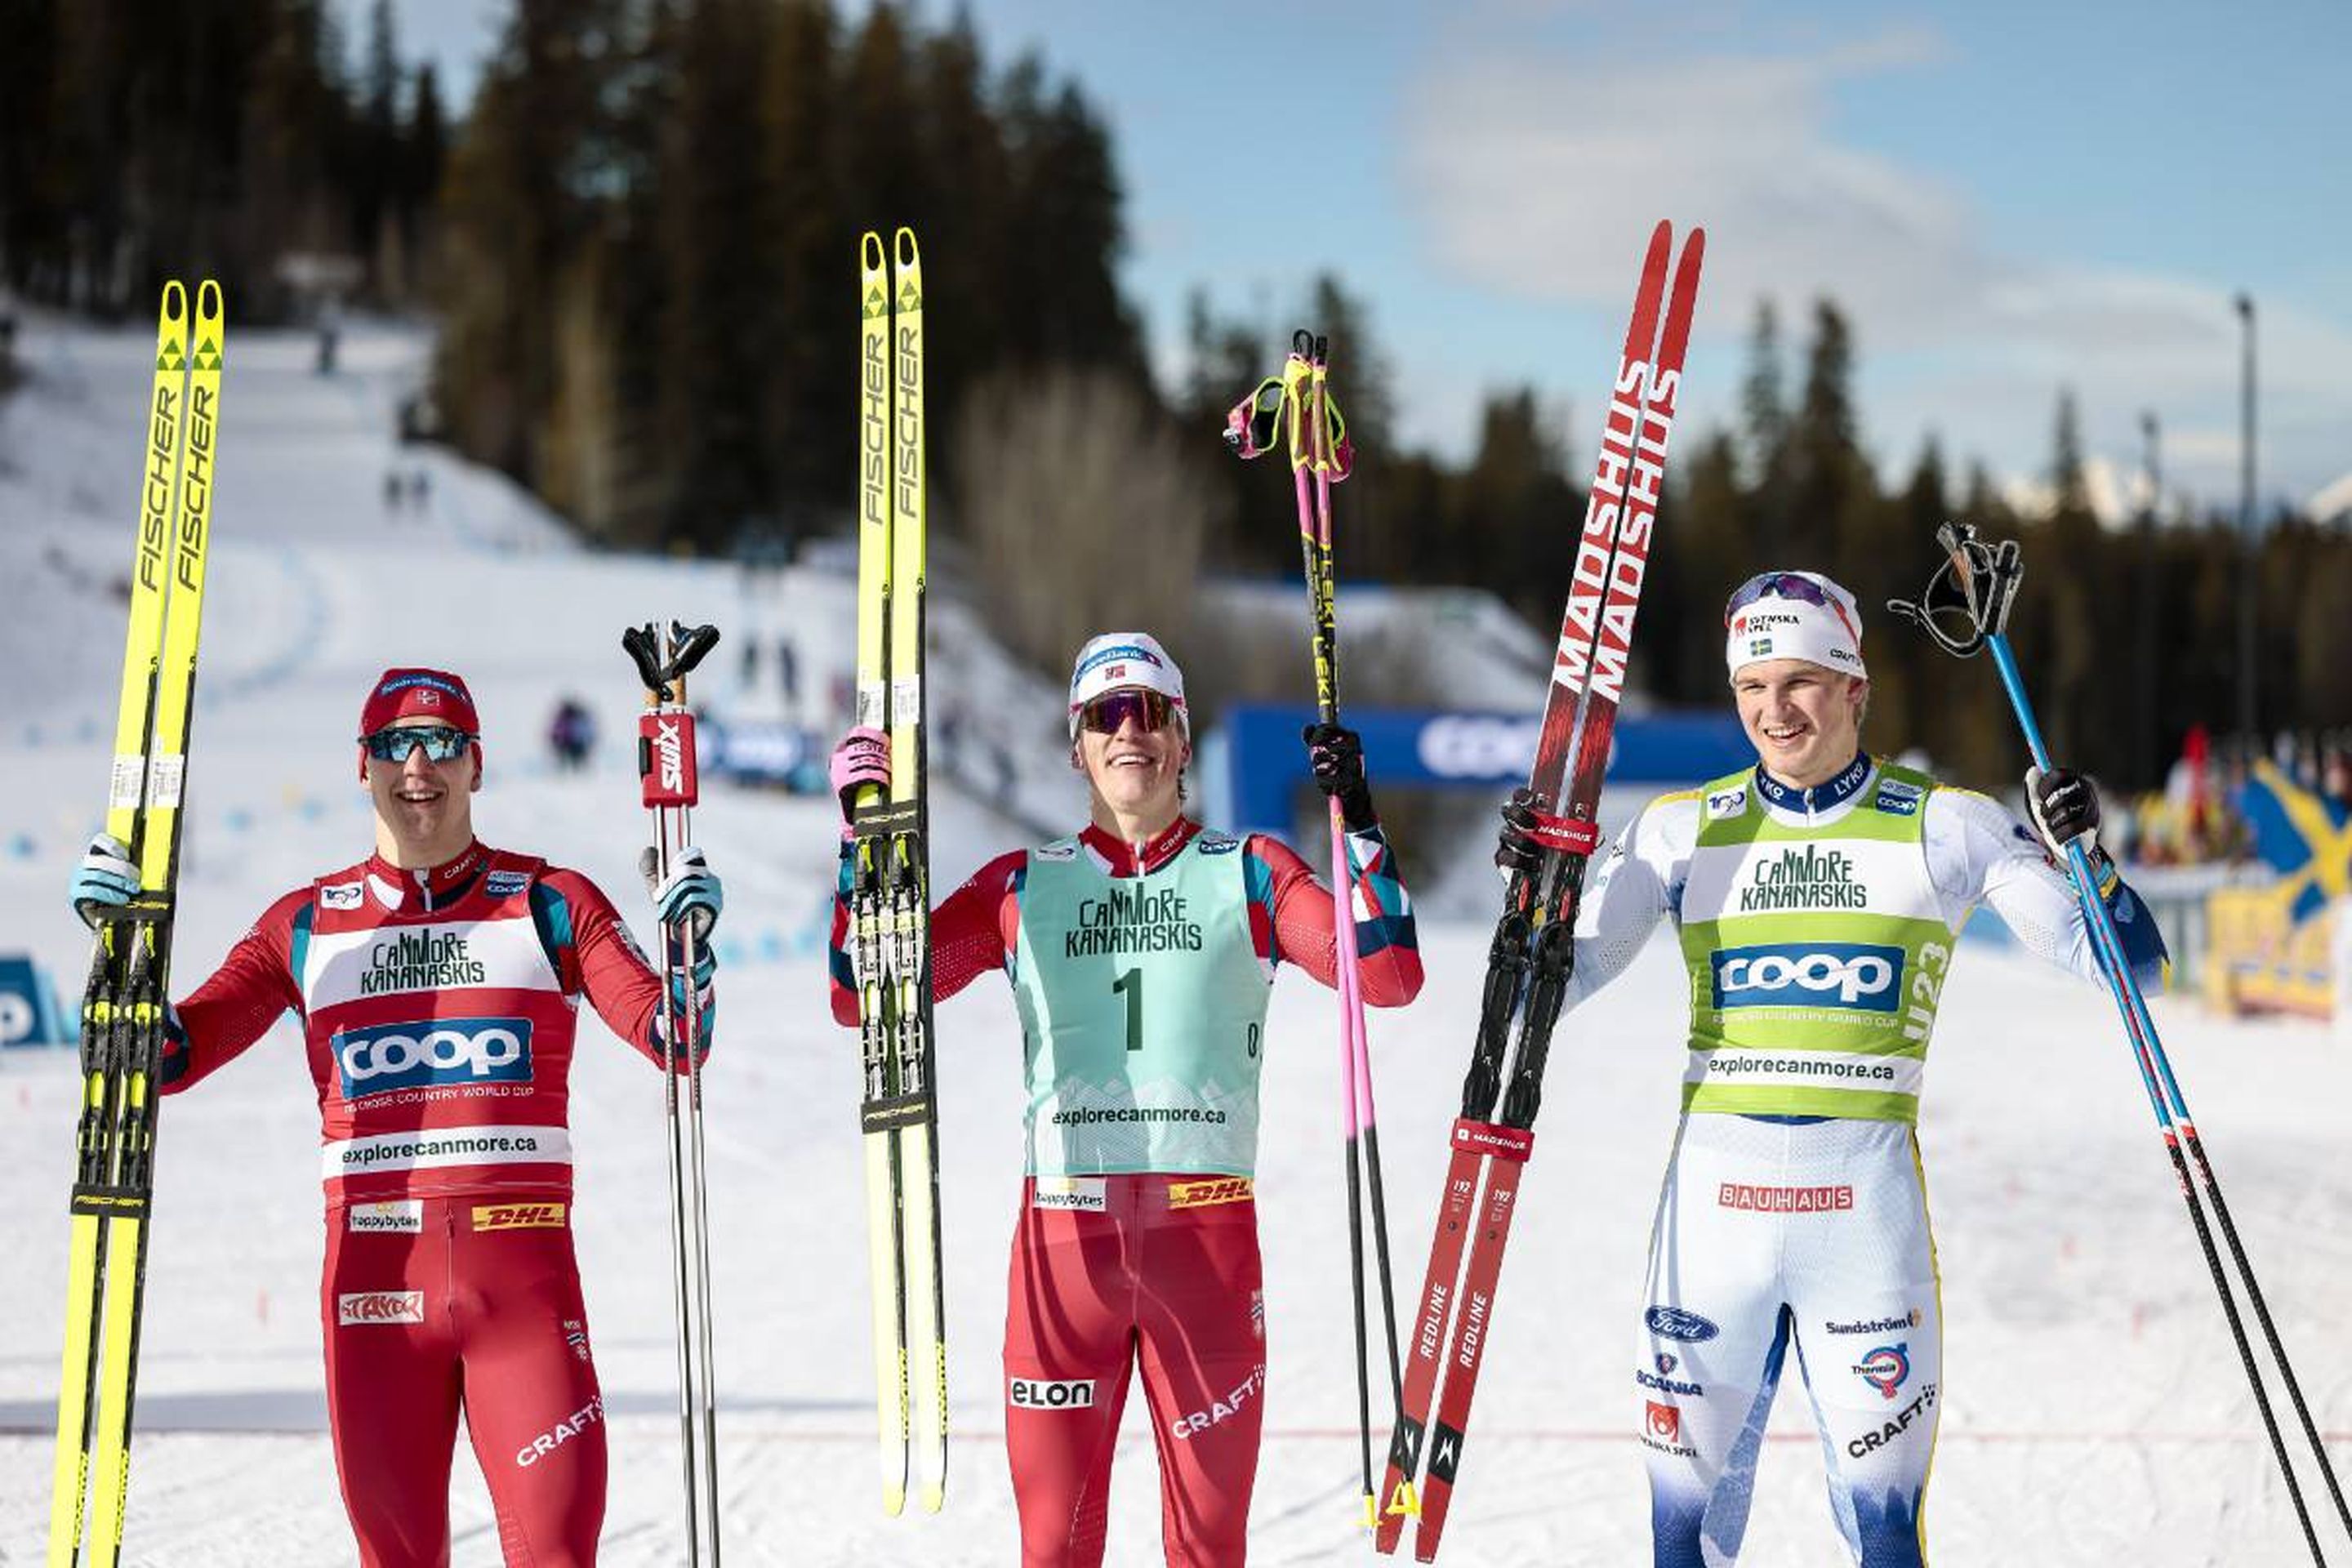 Norway's Erik Valnes (left) and Johannes Hoesflot Klaebo (centre) celebrate their top-three finish with Sweden's Edvin Anger (right) © NordicFocus